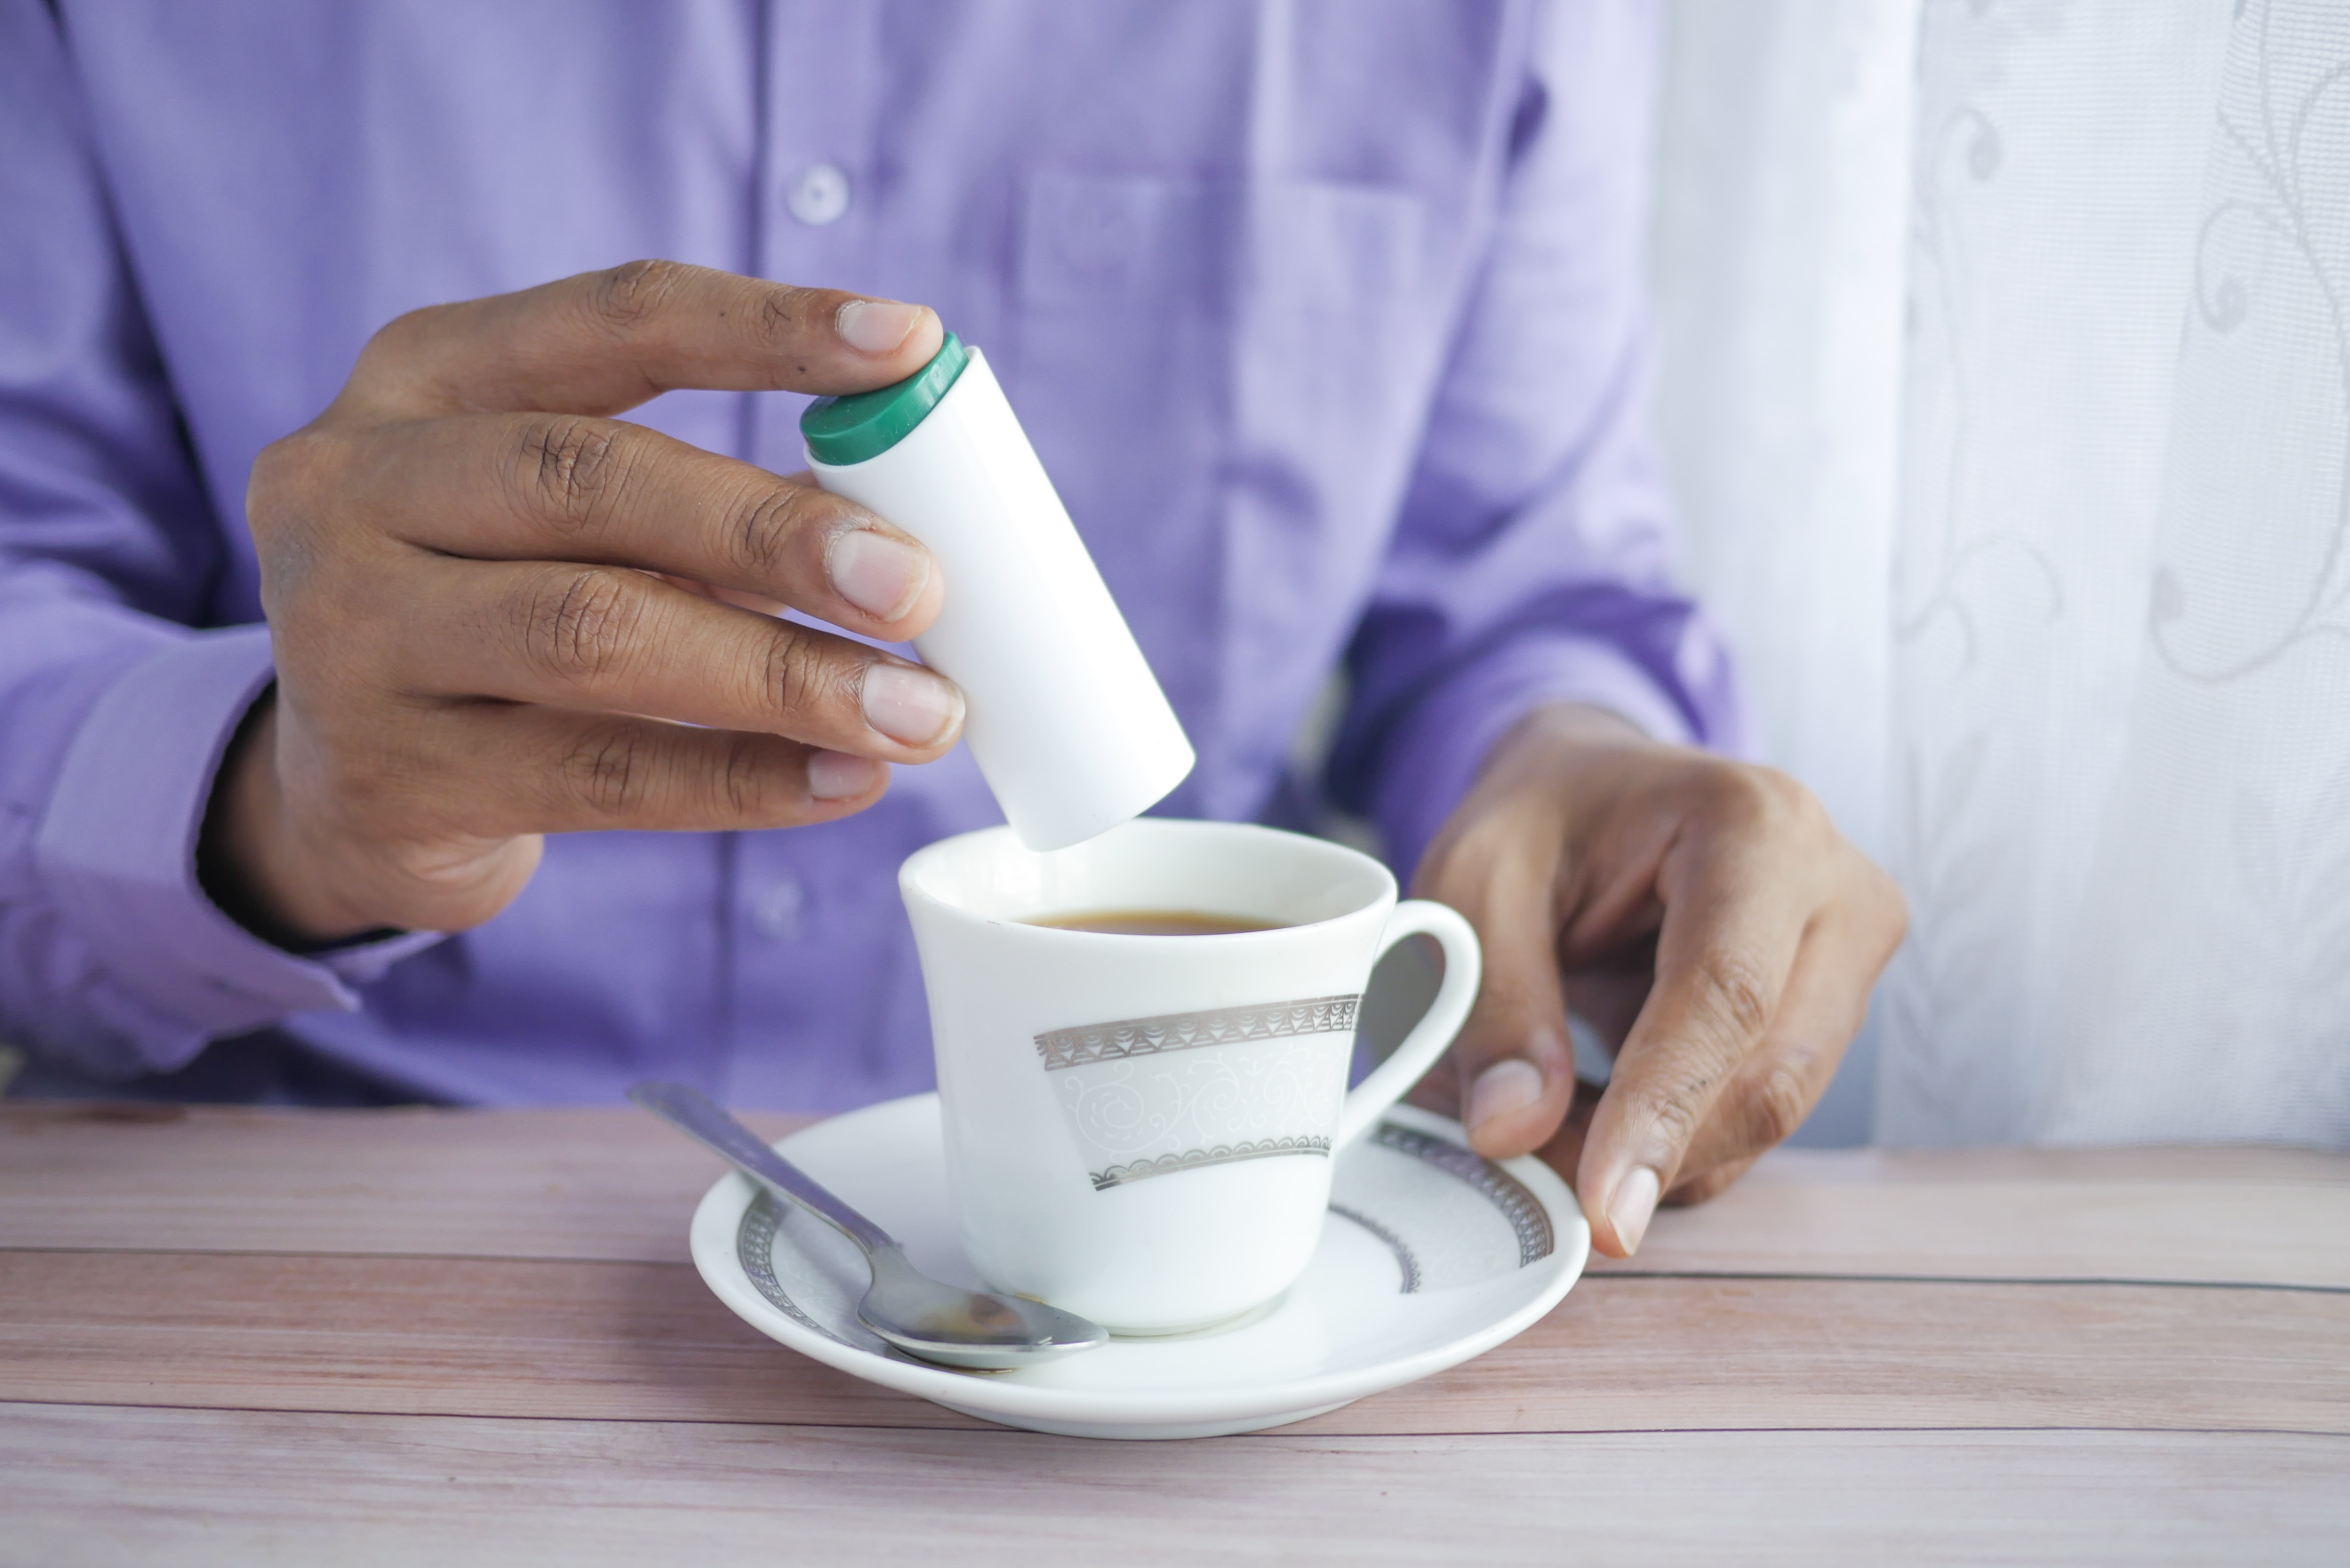 Man adds sweetener to his coffee